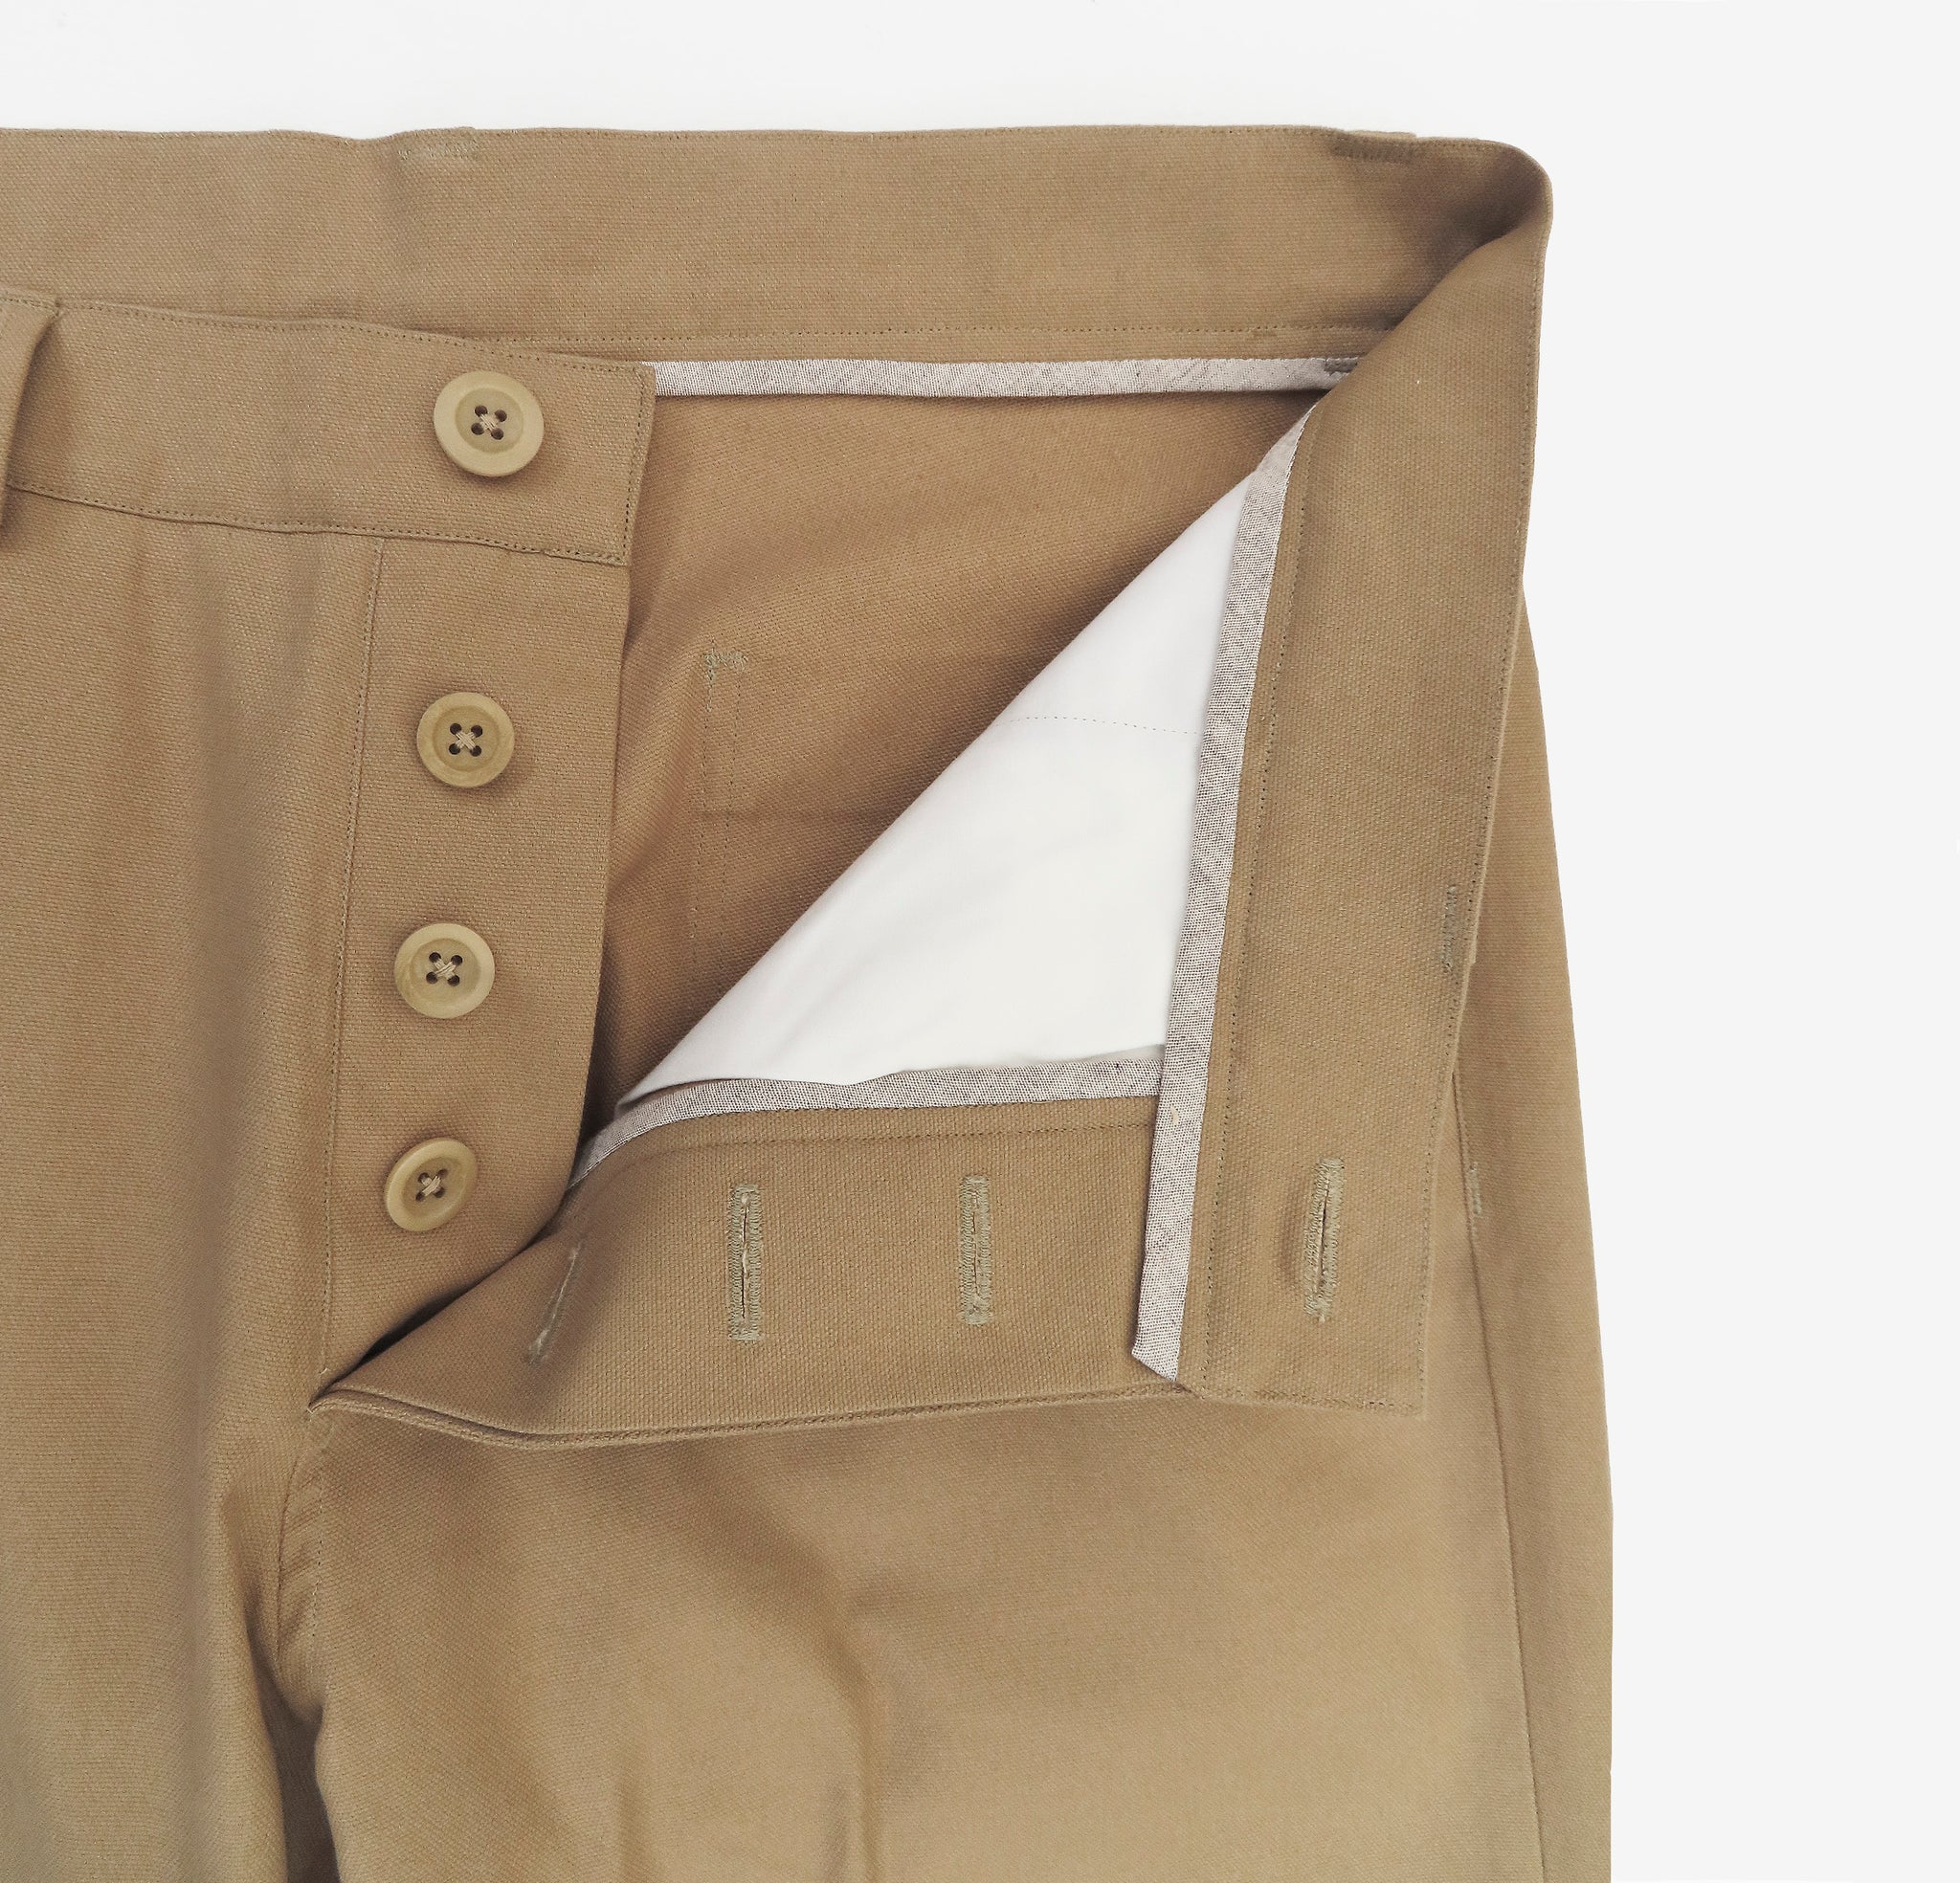 Architect  trousers in tan cotton canvas